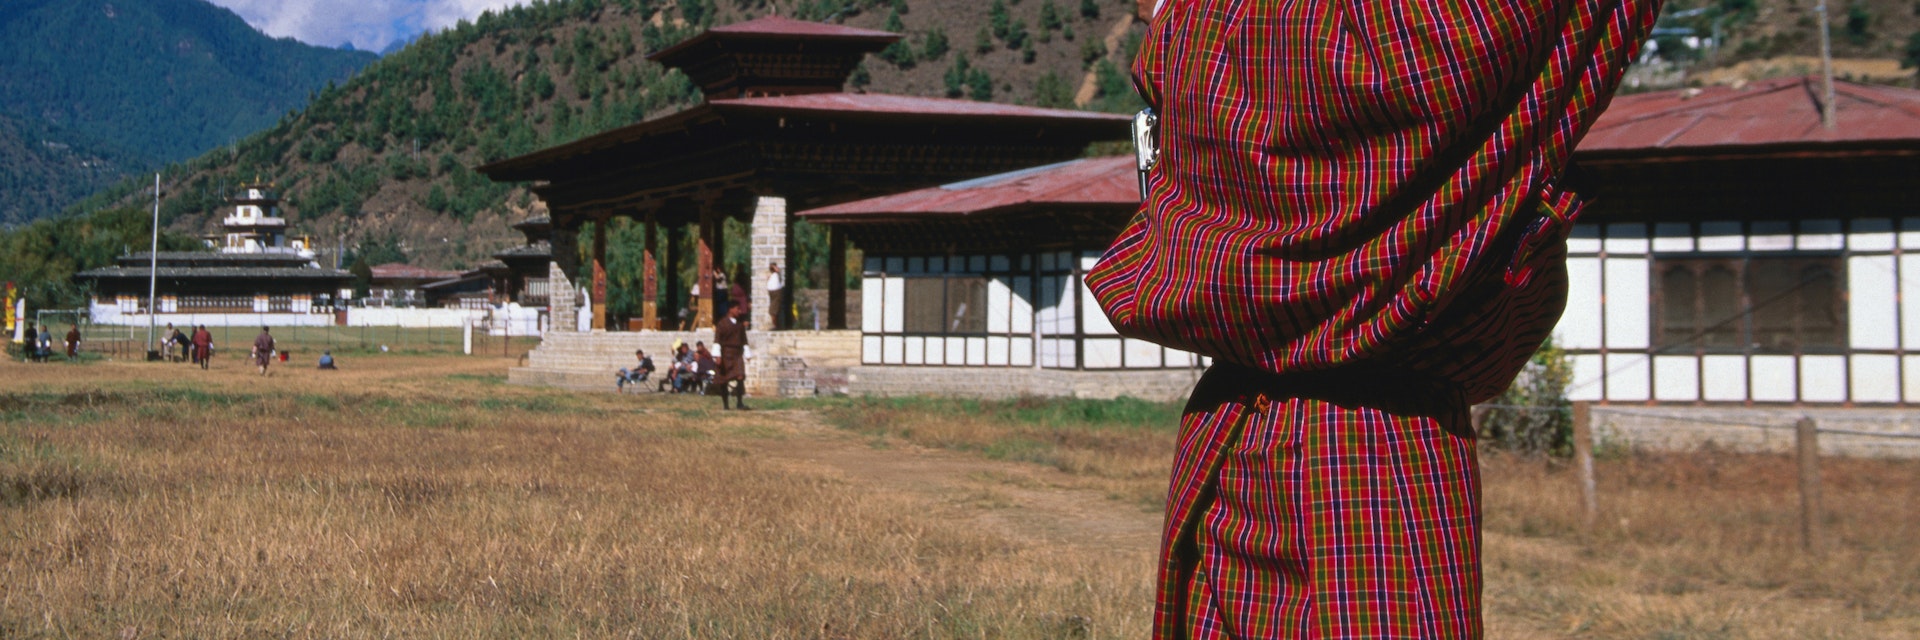 Archer in traditional dress drawing bow in archery competition at national archery ground, Changlimithang Stadium.